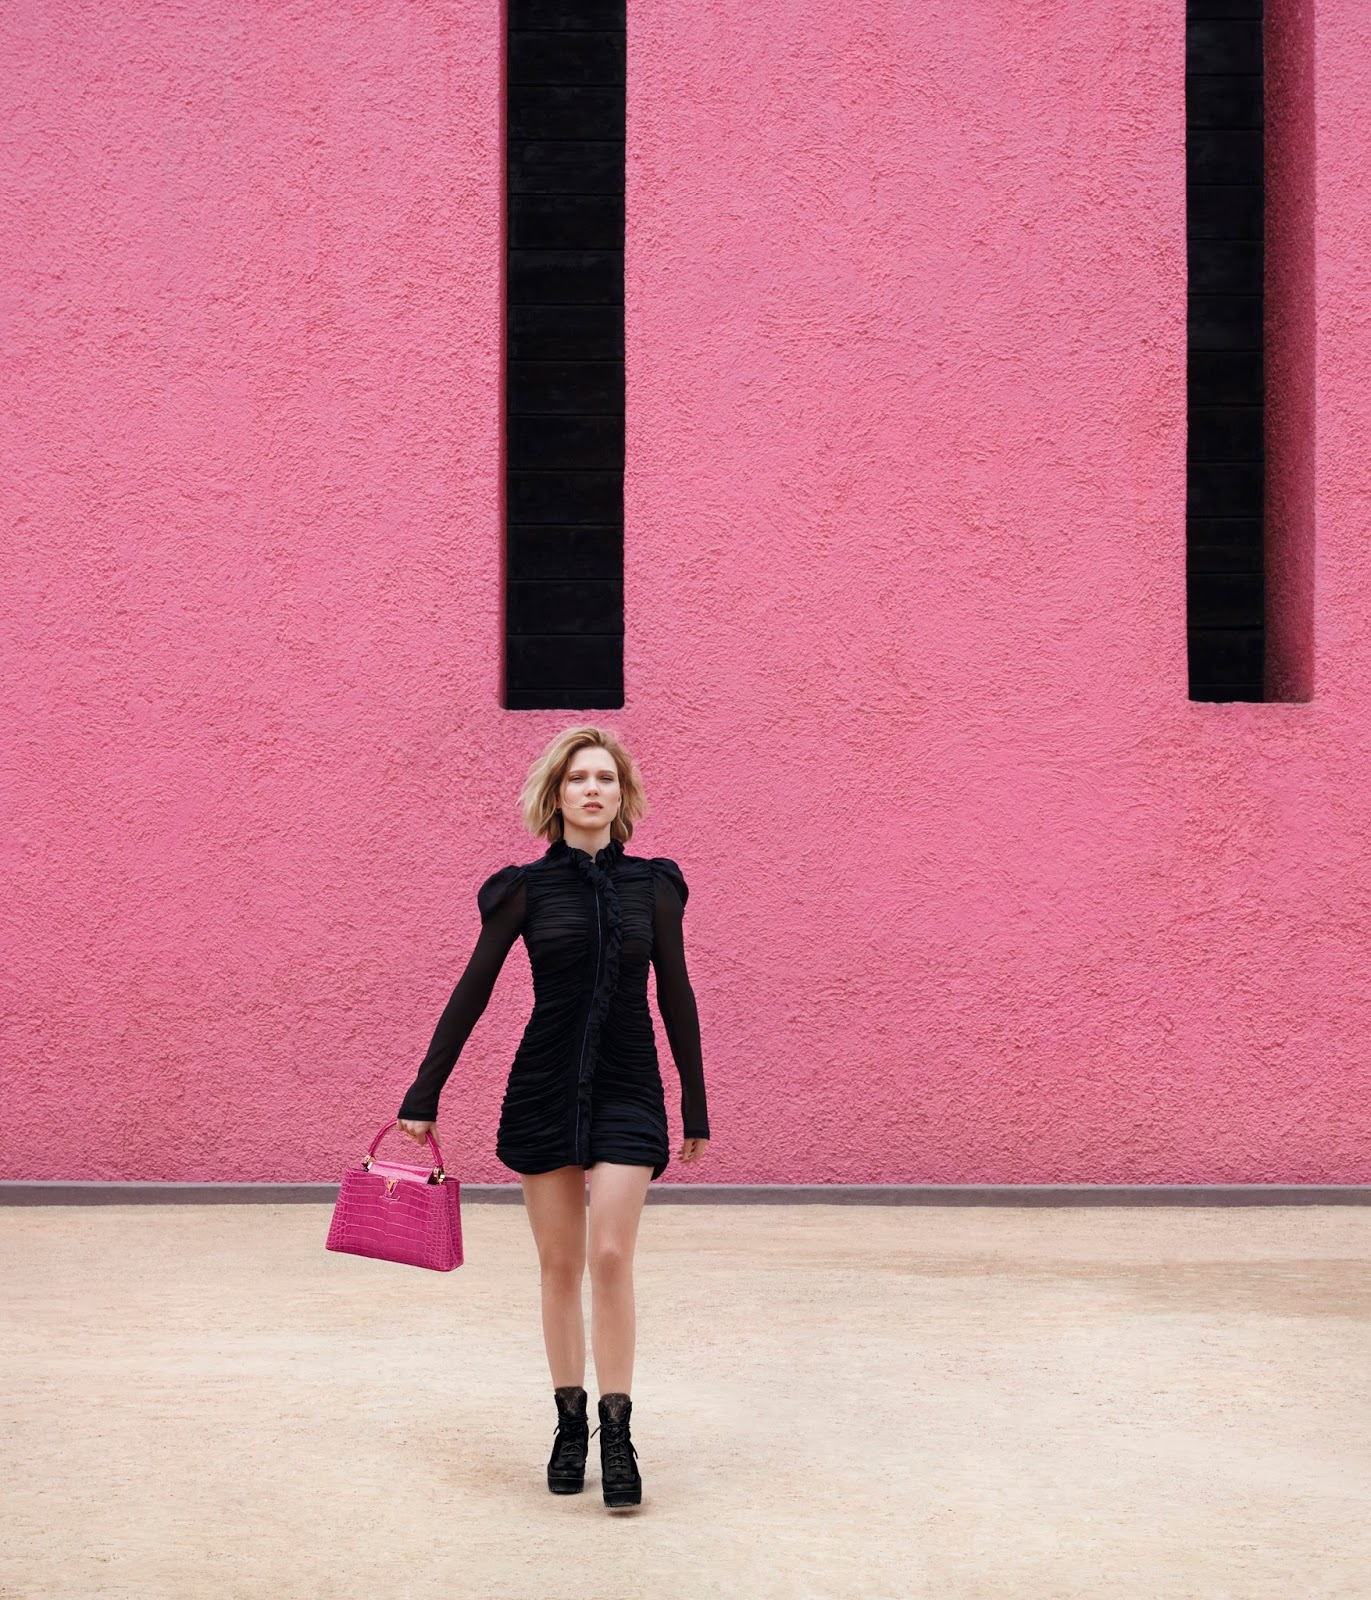 Bond Girl Lea Seydoux Gives A Peek Into Her First Louis Vuitton Campaign To  Release Friday